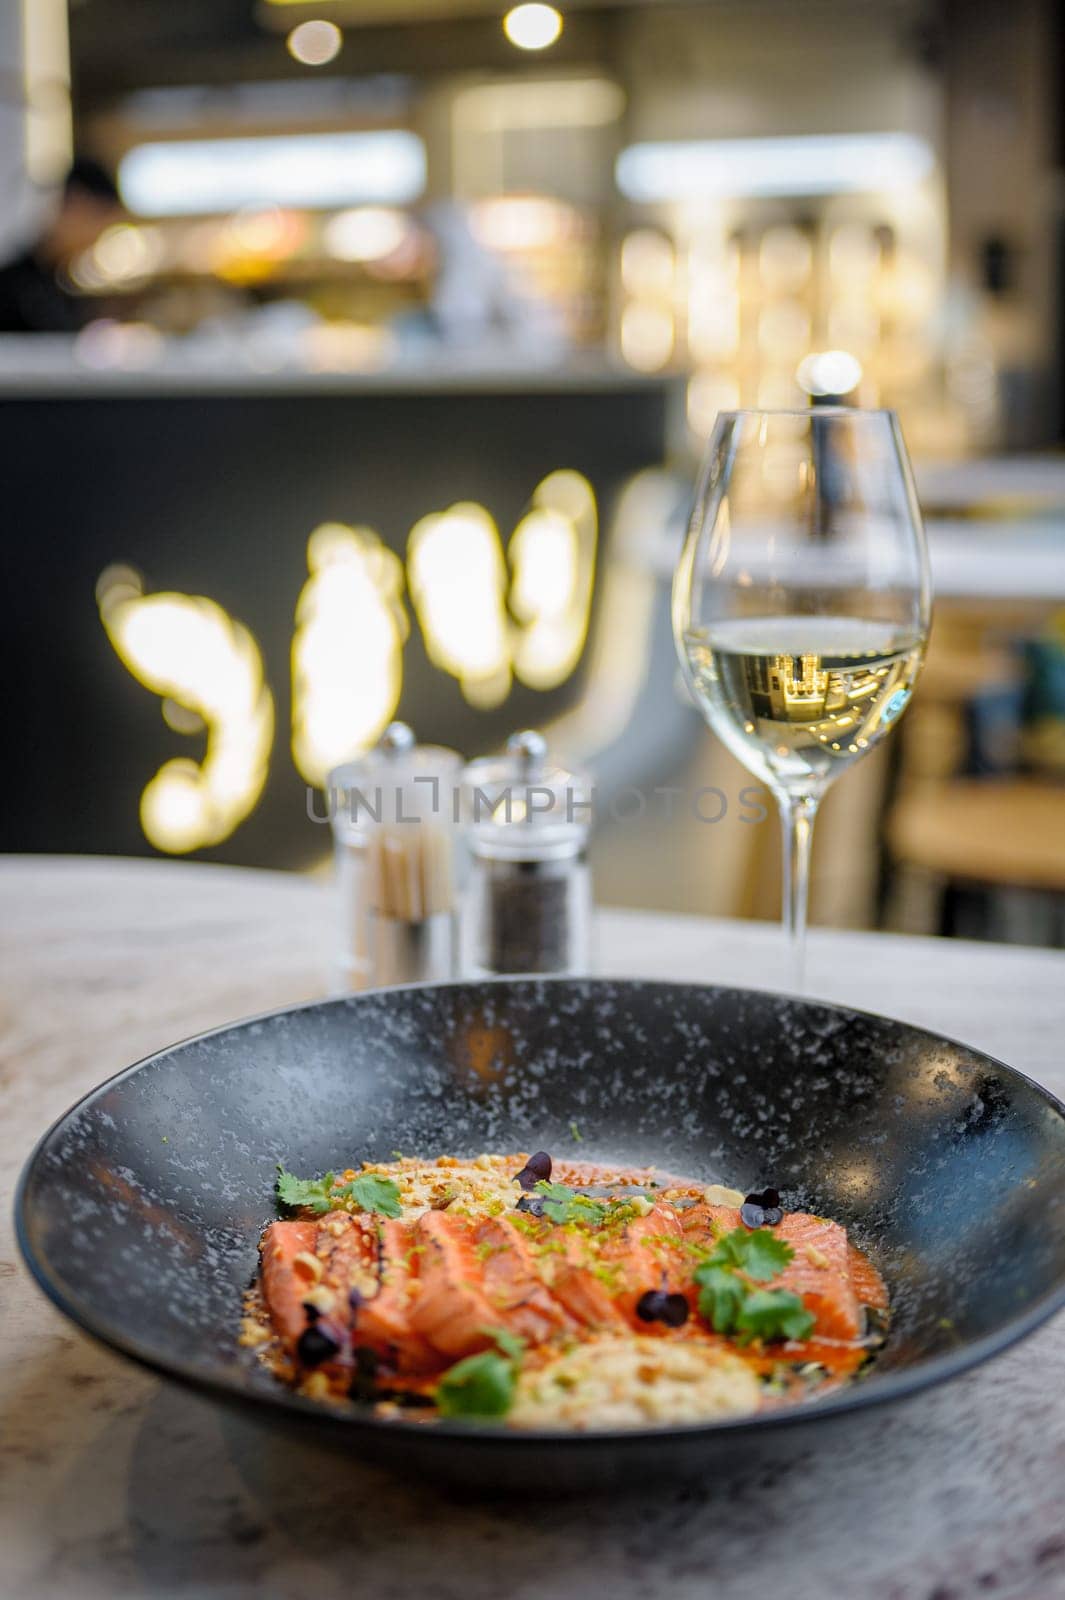 Salmon tataki in sauce with peanuts and herbs on a marble table in a restaurant. High quality photo